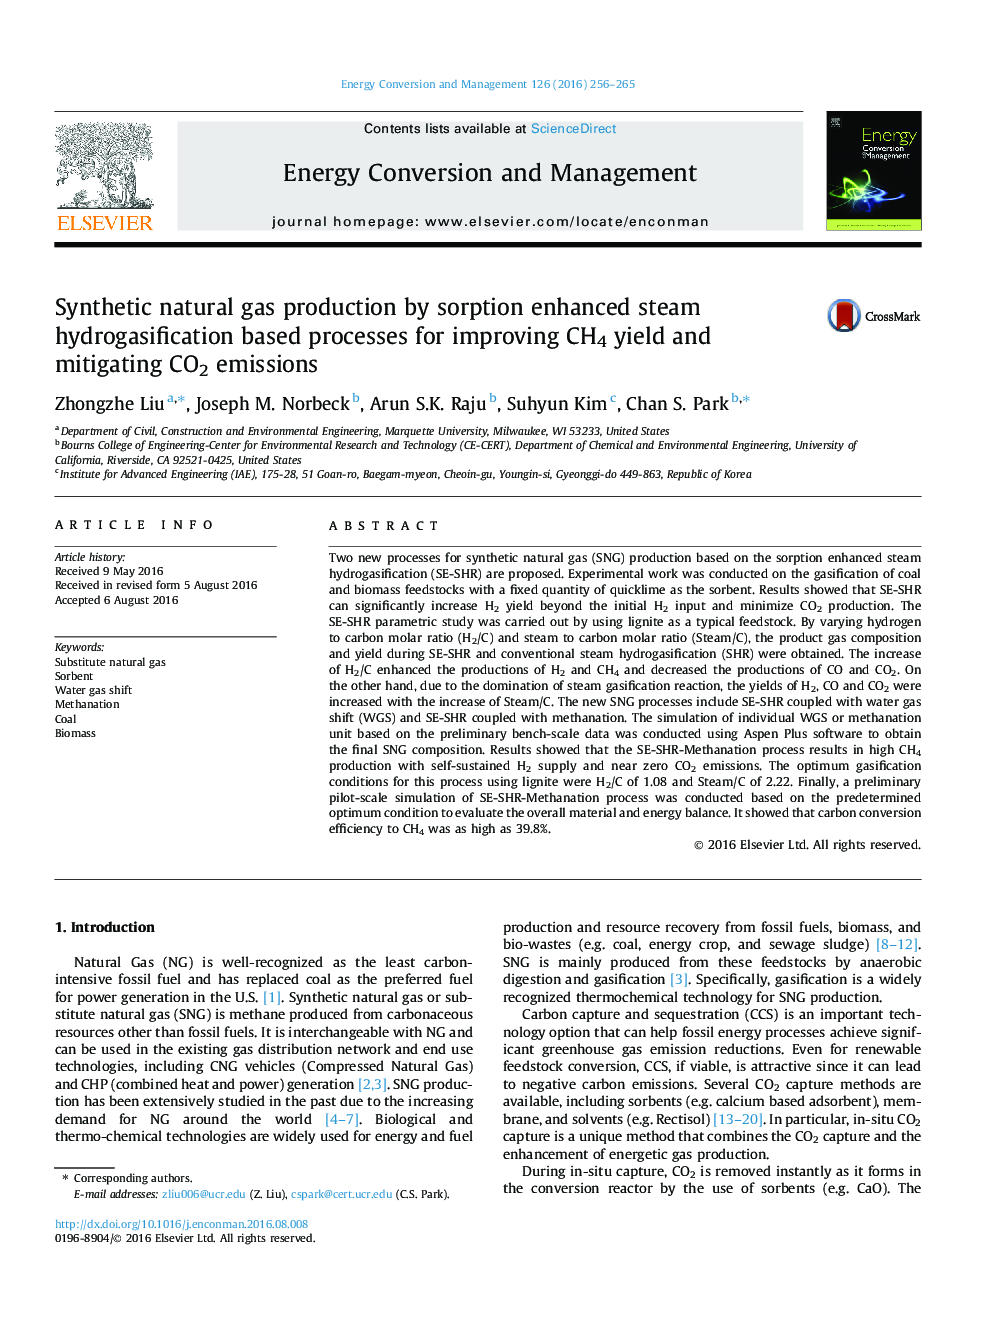 Synthetic natural gas production by sorption enhanced steam hydrogasification based processes for improving CH4 yield and mitigating CO2 emissions